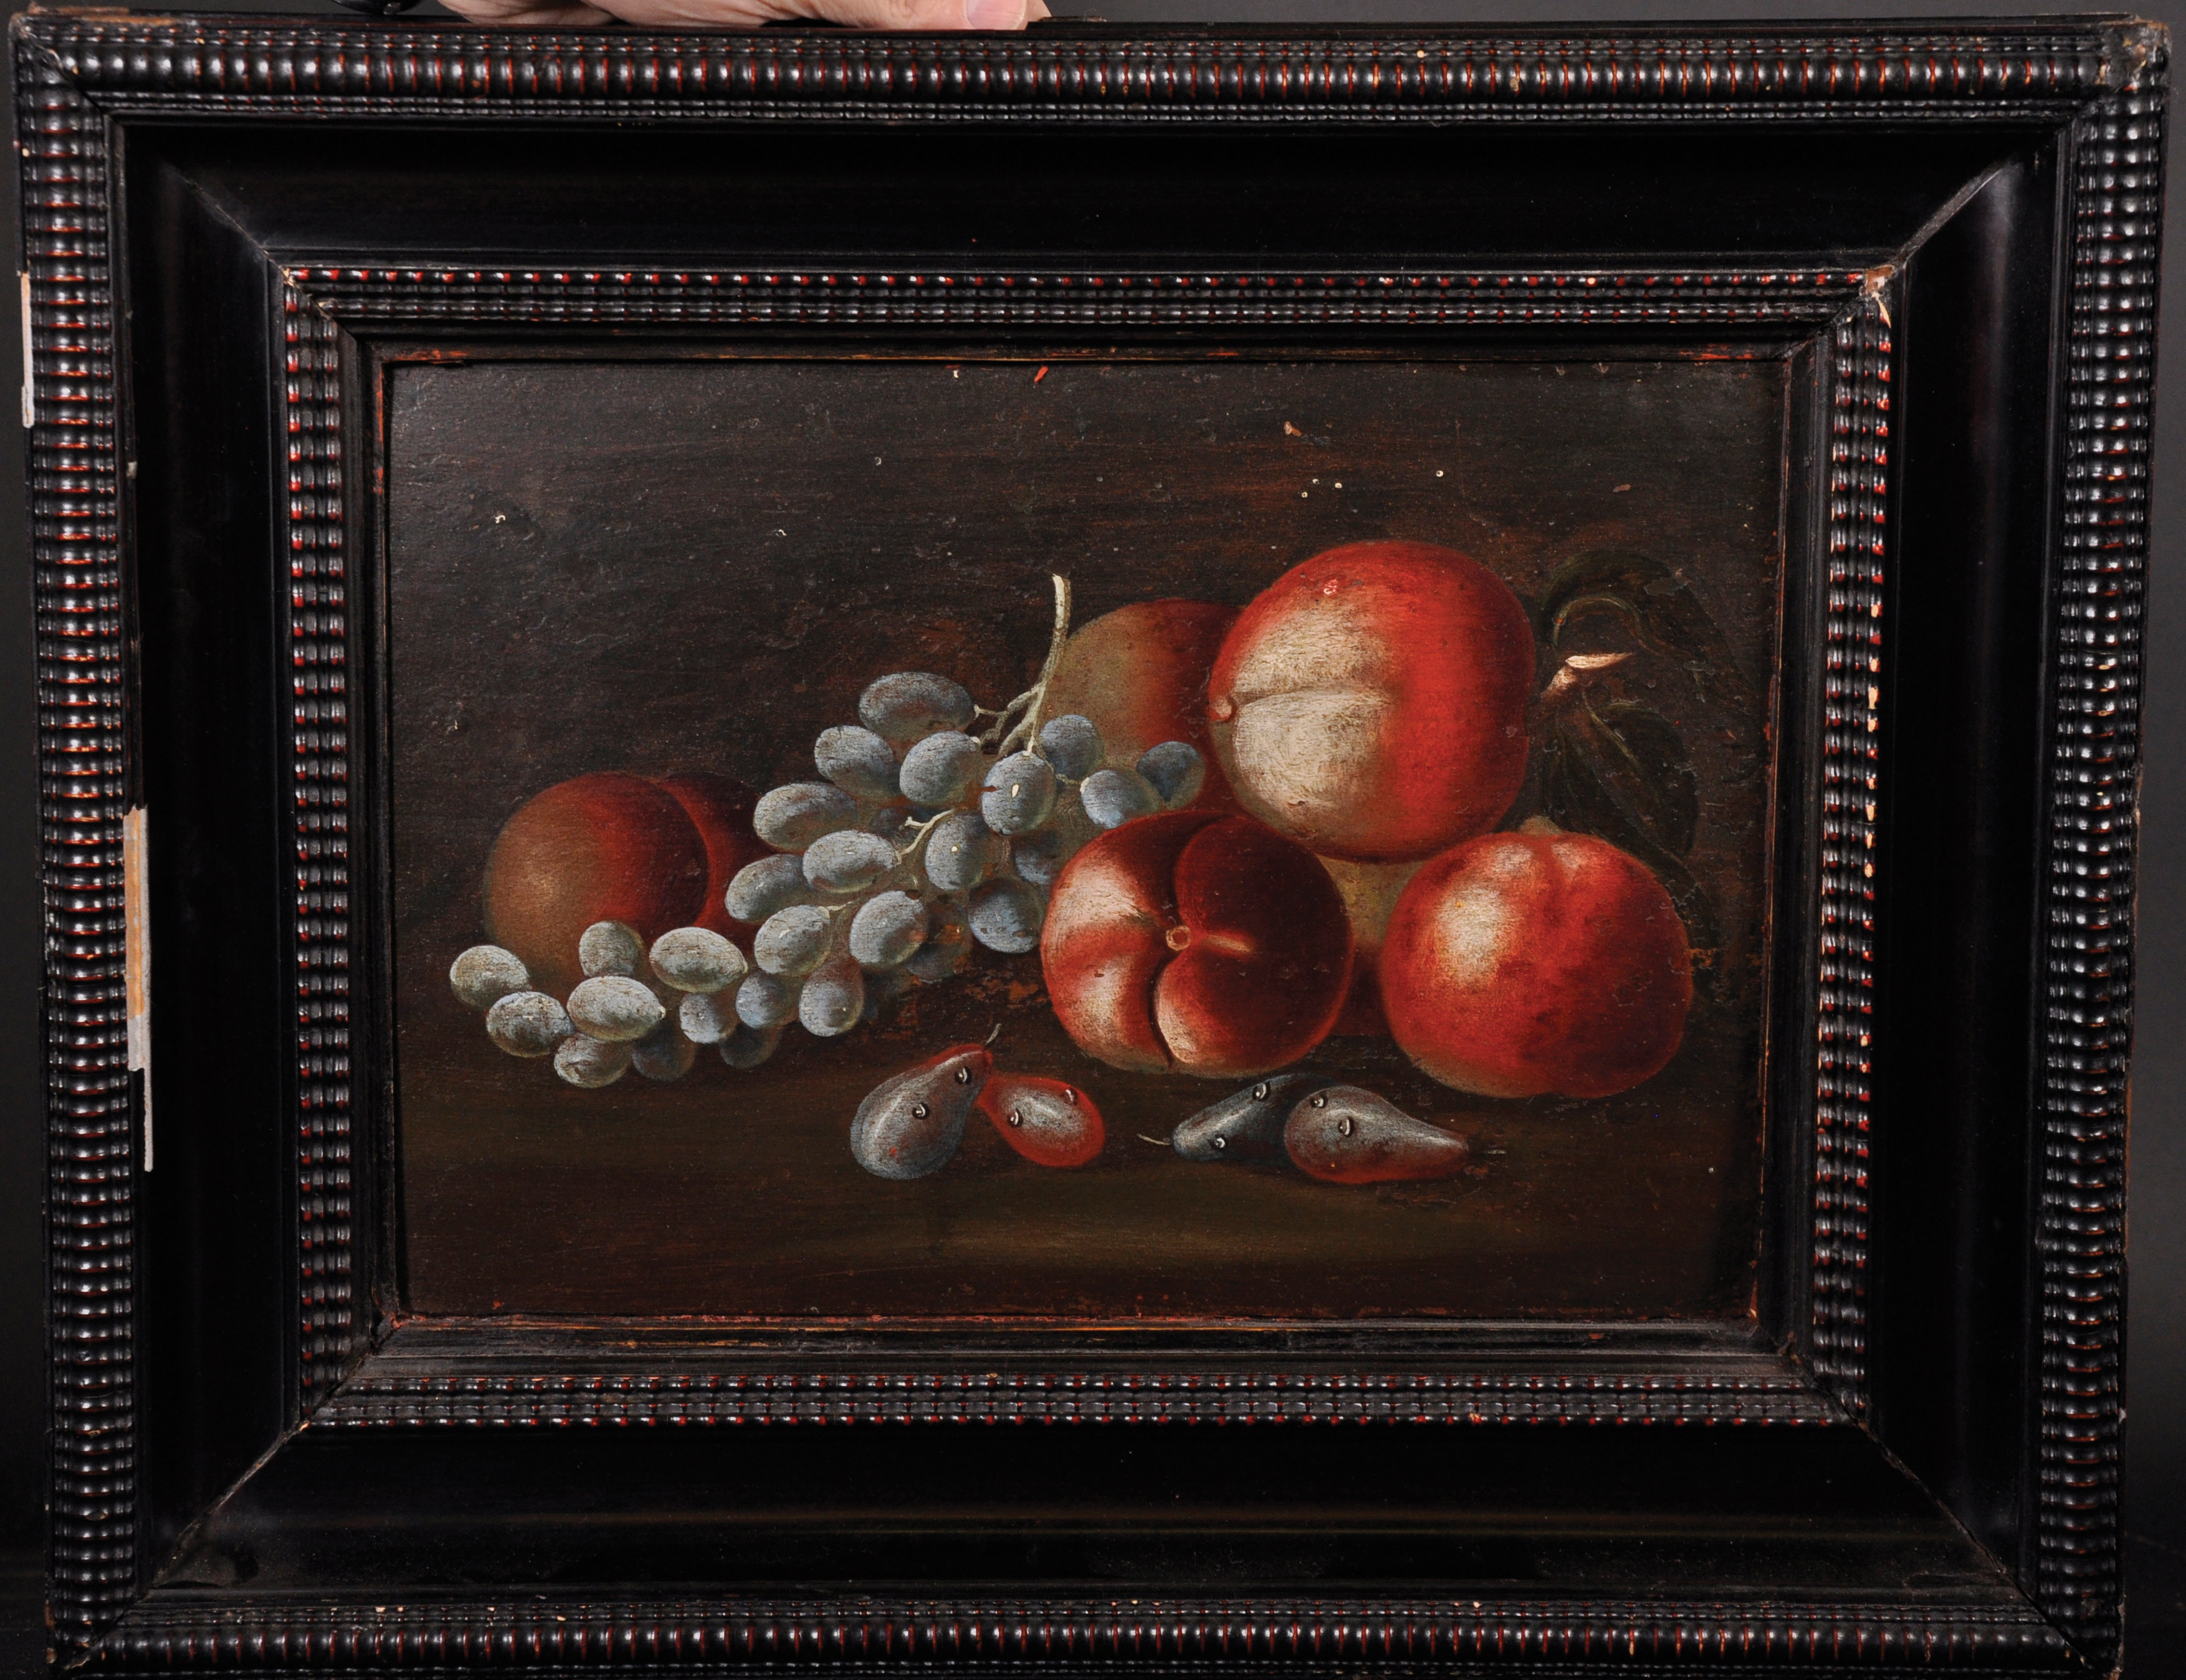 19th Century Italian School. A Still Life with Peaches, Pears and Grapes, Oil on Panel, 10.25" x - Image 2 of 3